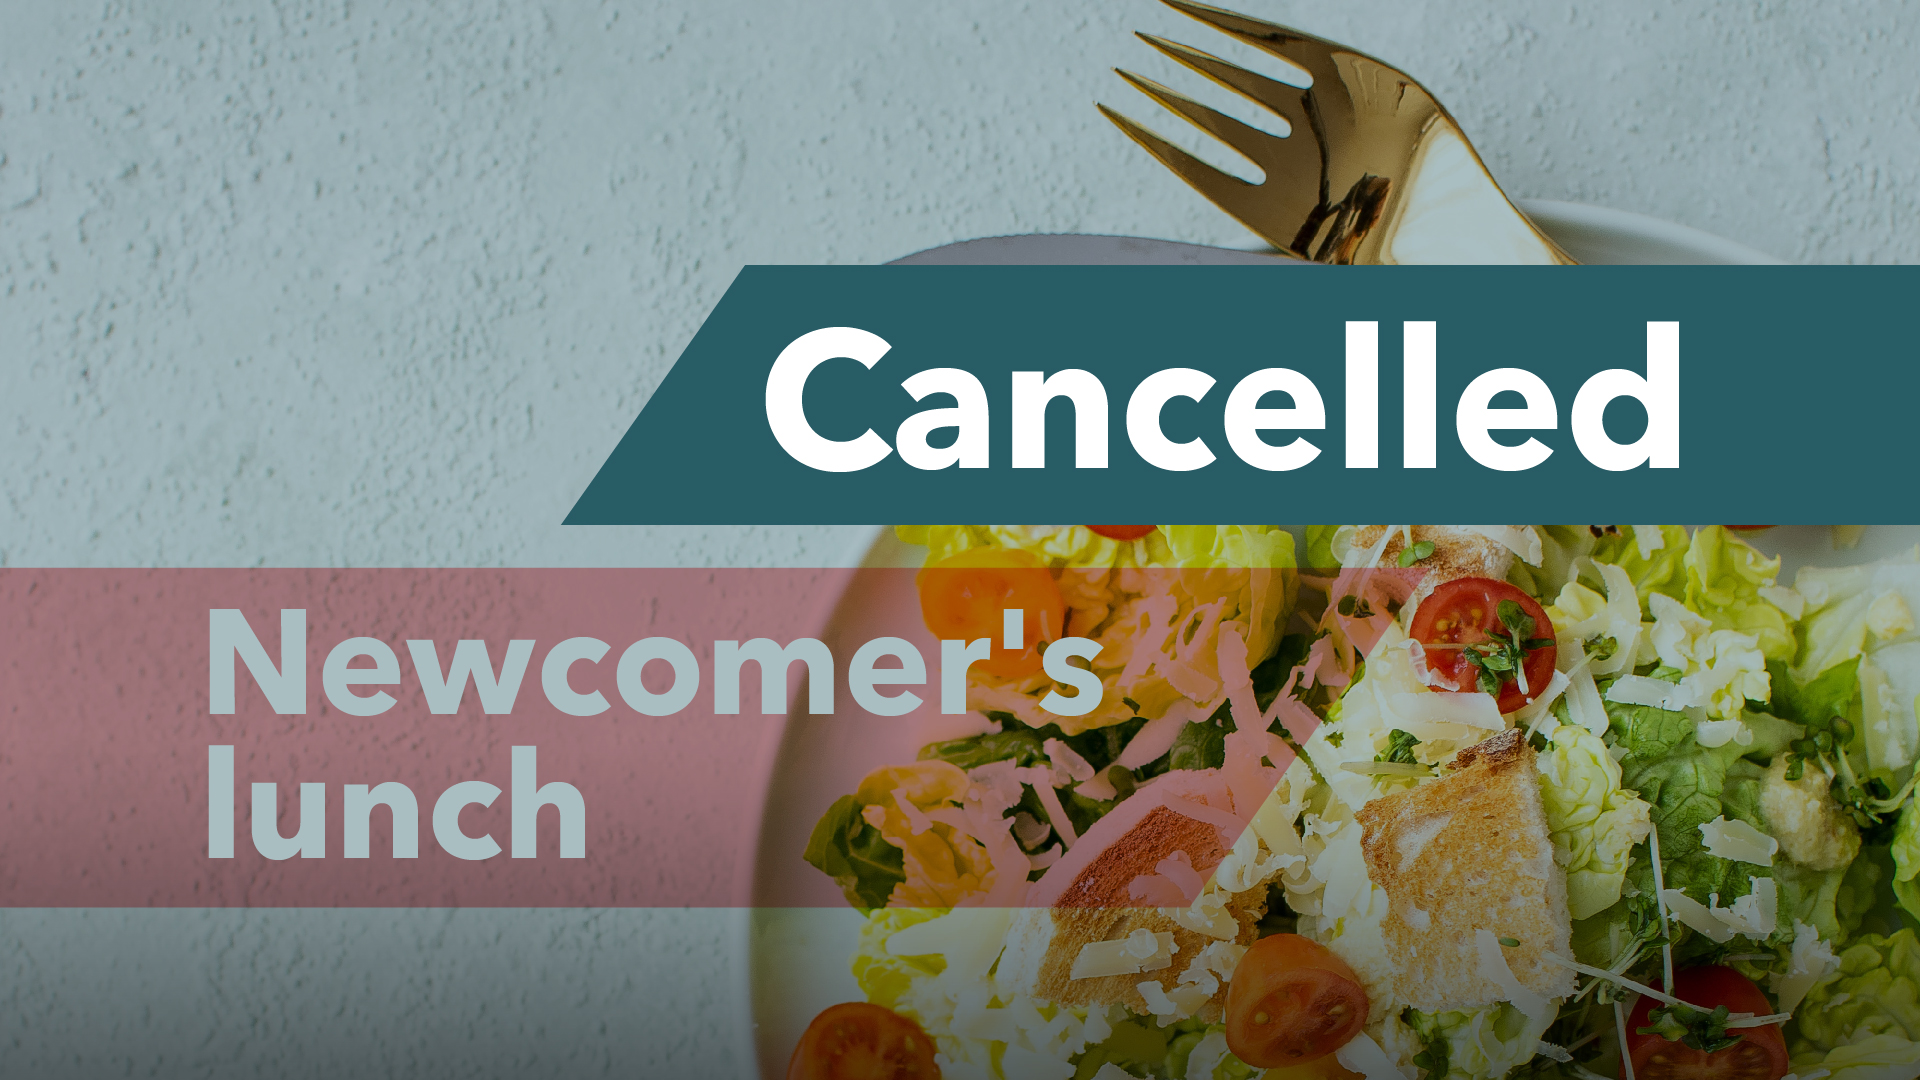 Newcomer's Lunch Cancelled